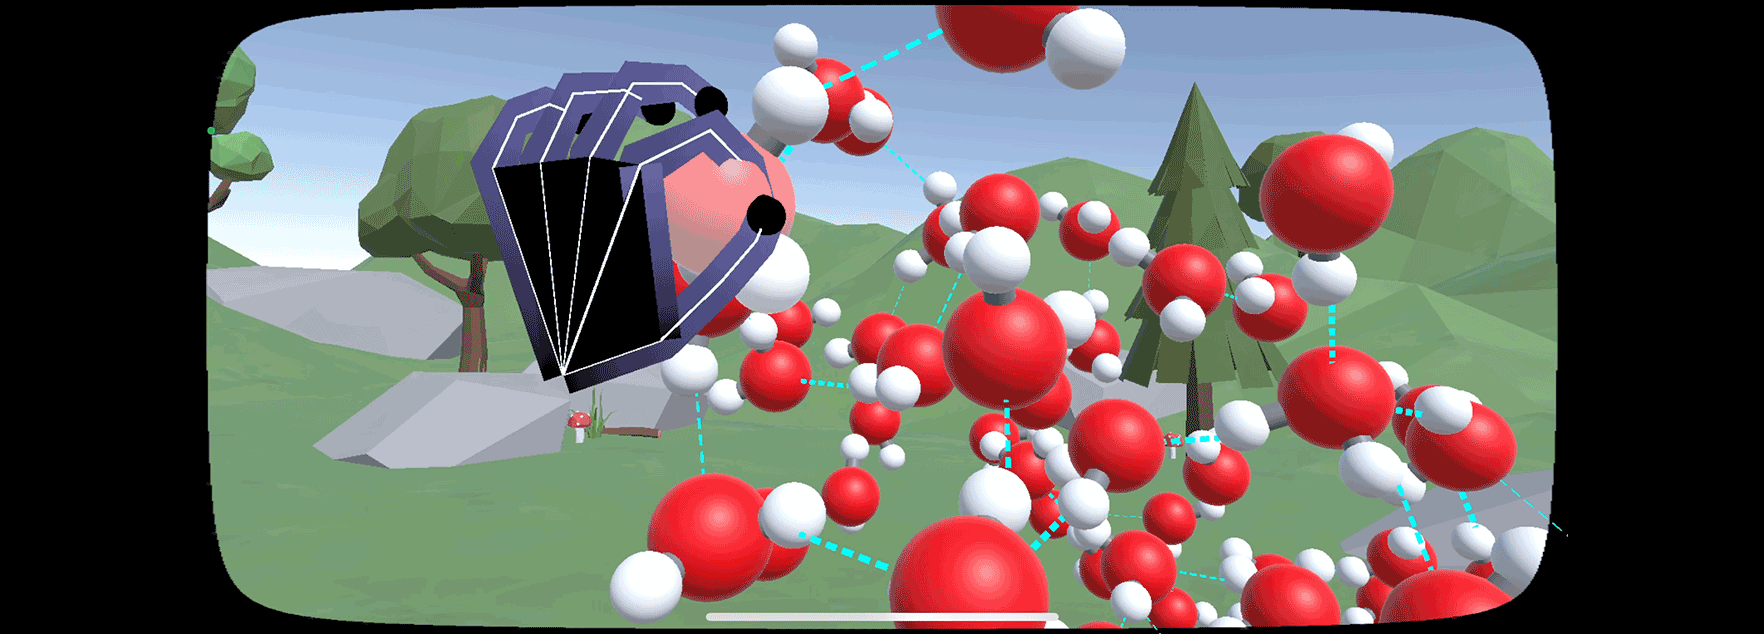 Water molecules in the learning application “VR-MD”